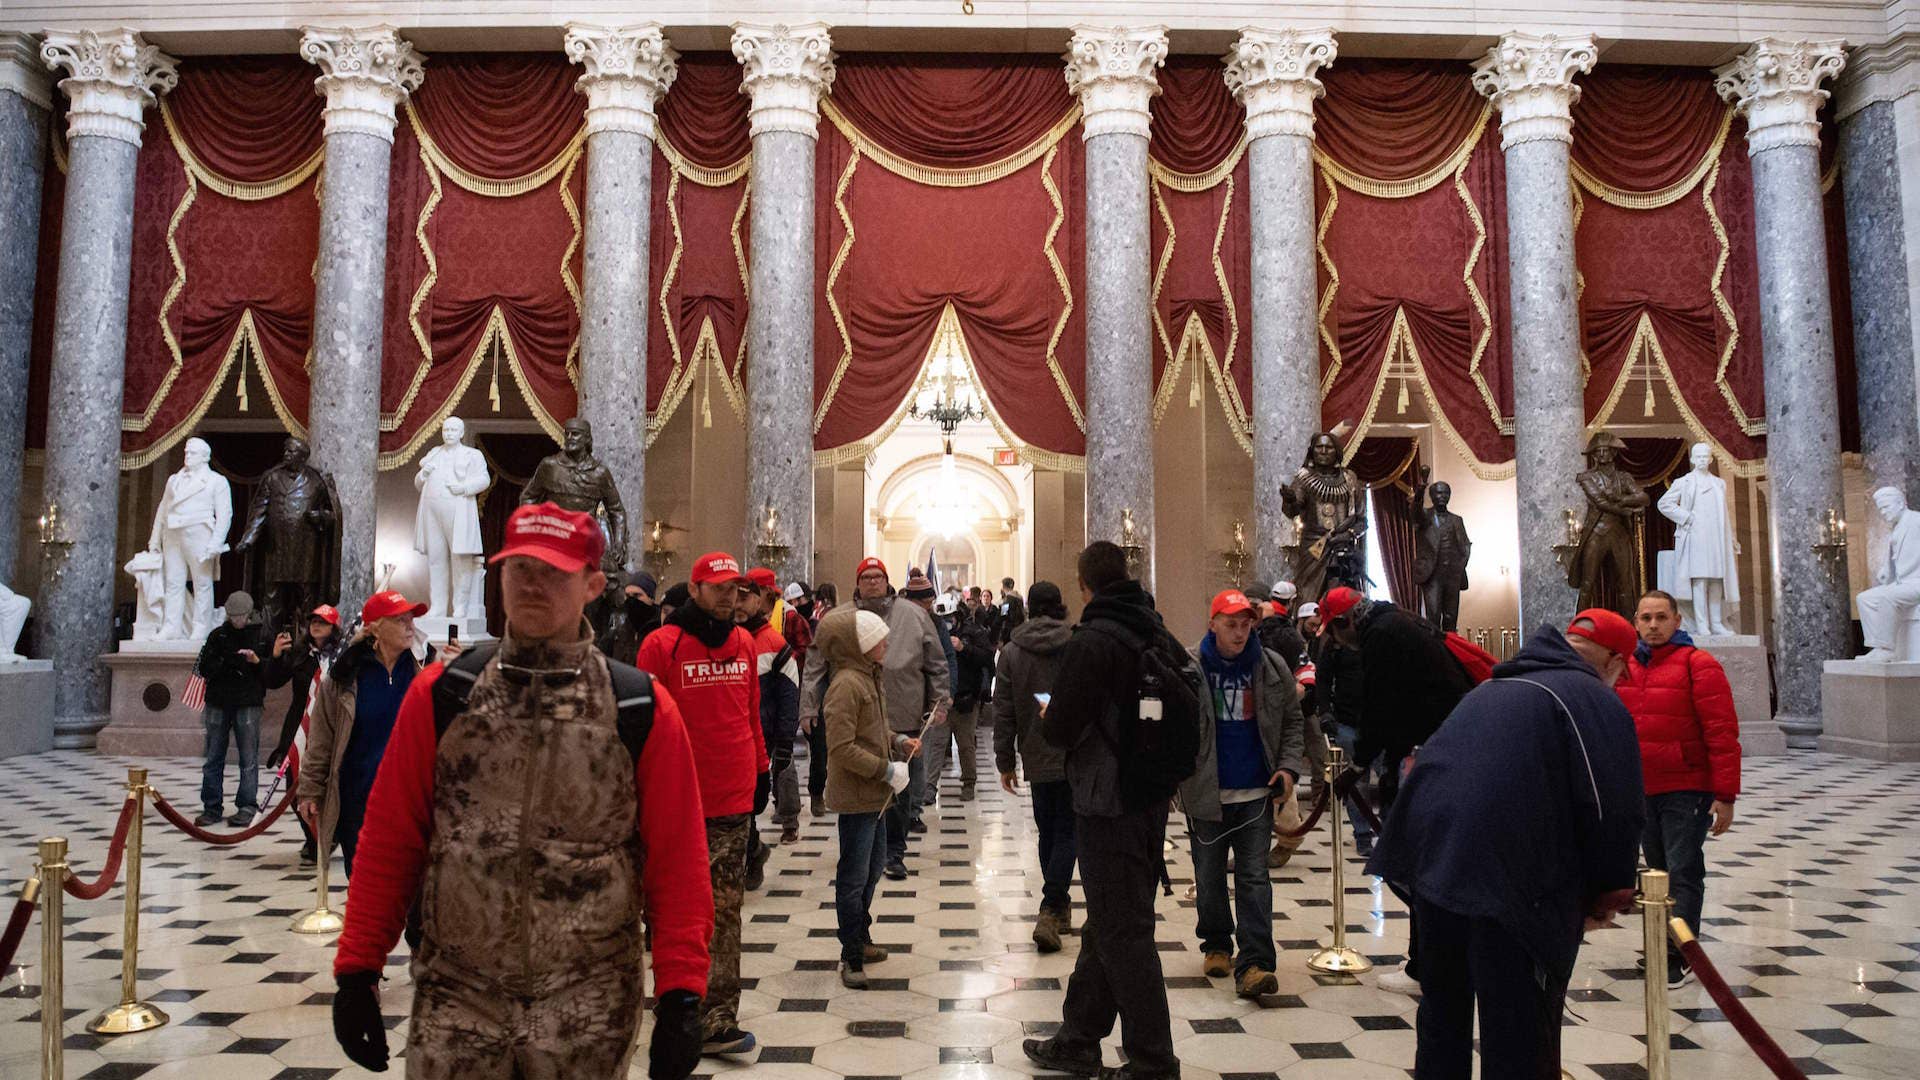 Supporters of US President Donald Trump walk through Statuary Hall